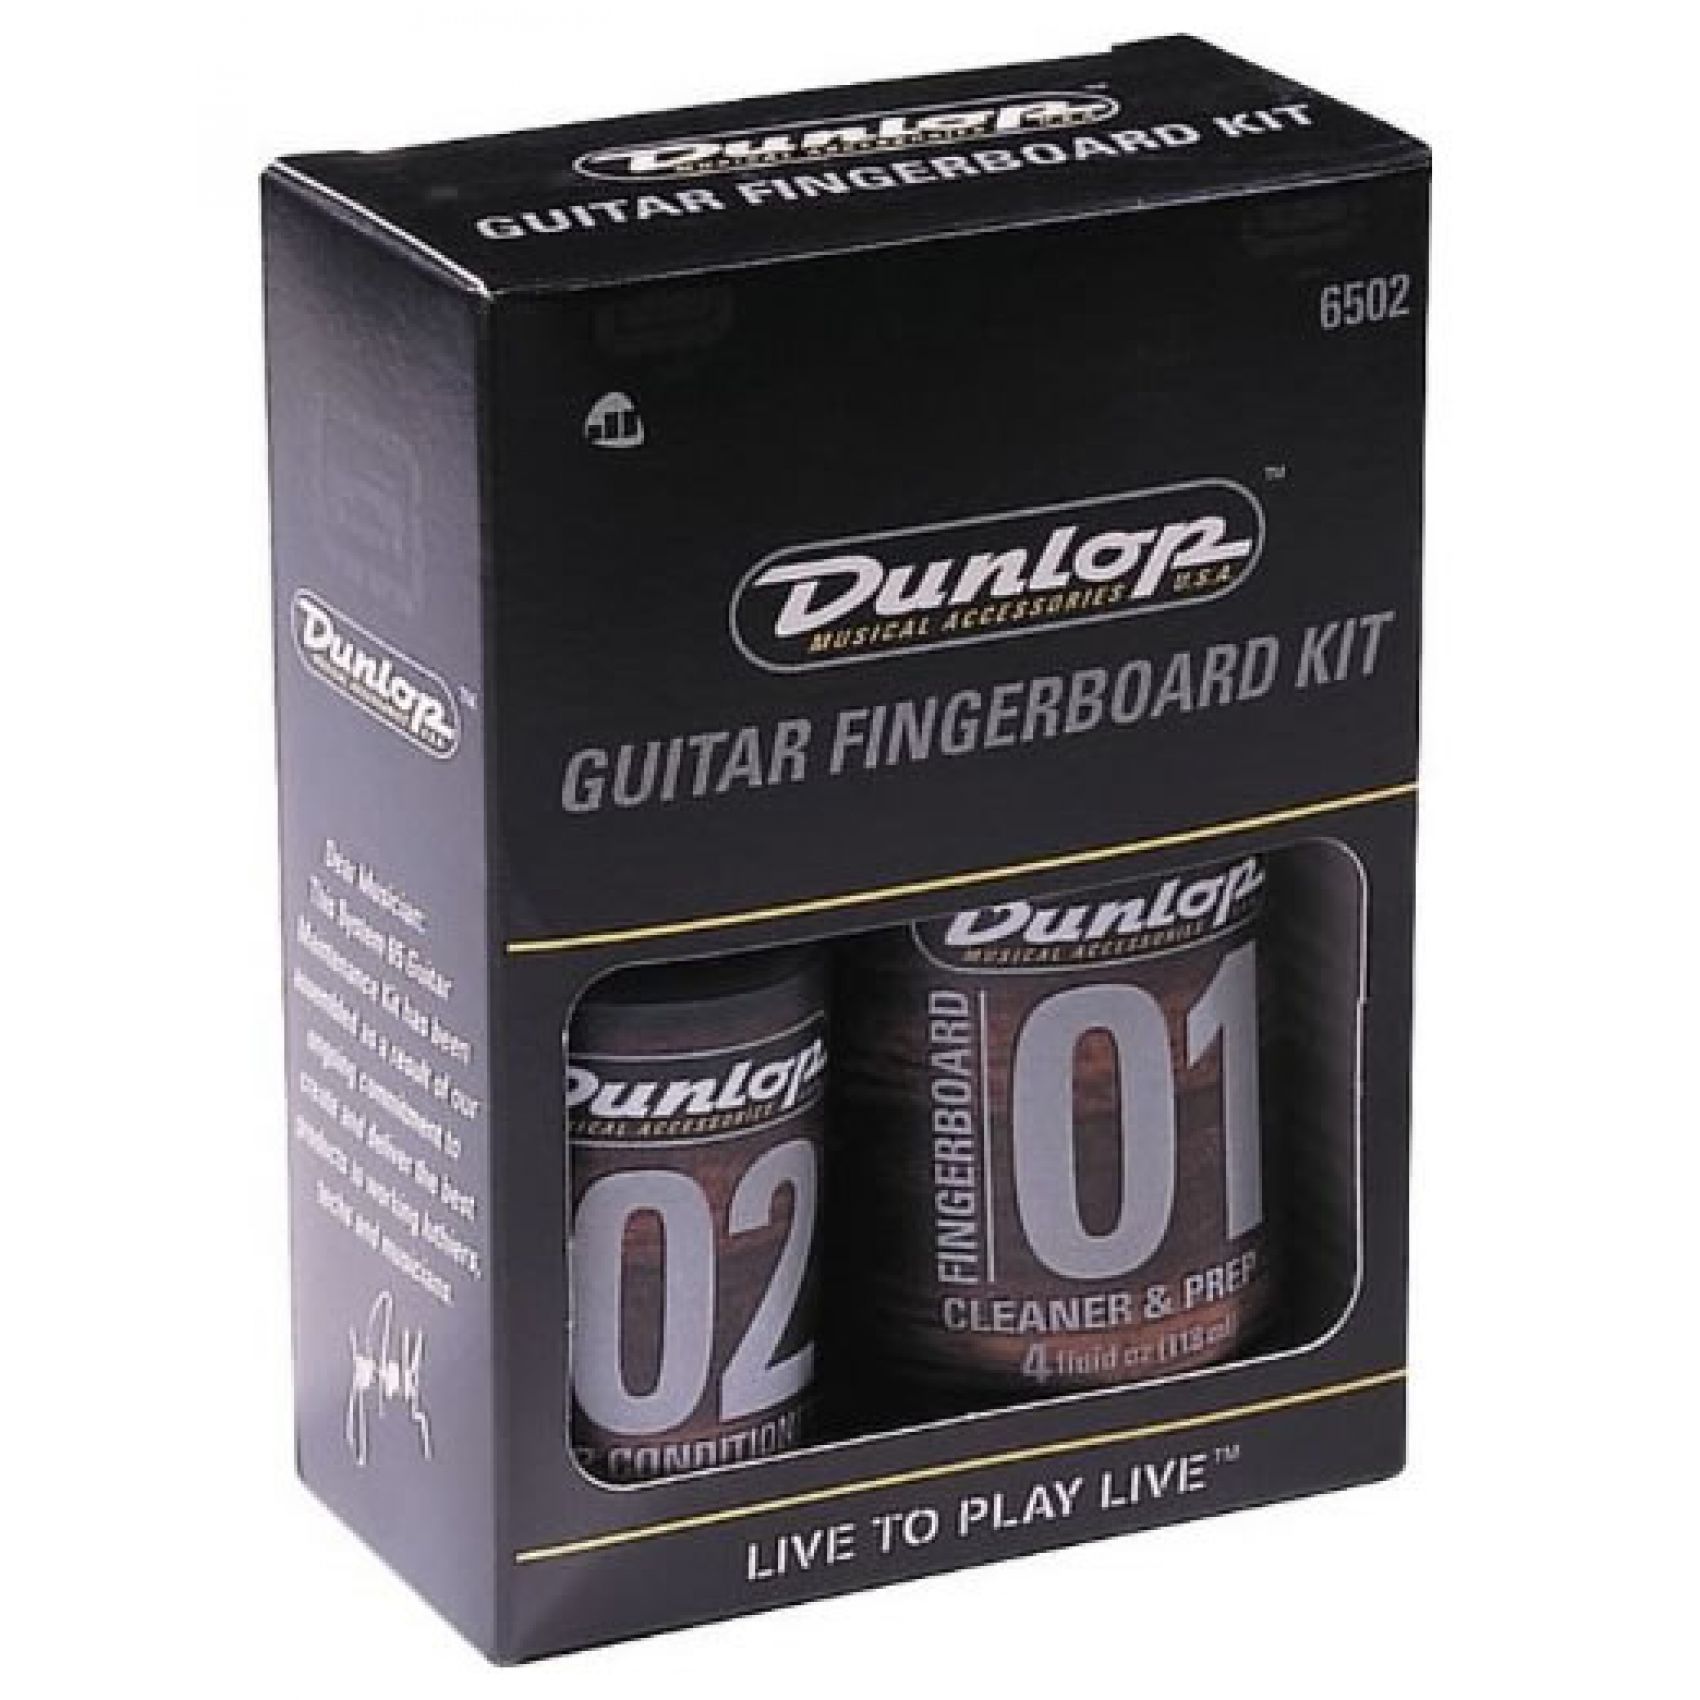 Dunlop 6502 Formula 65 Care Products